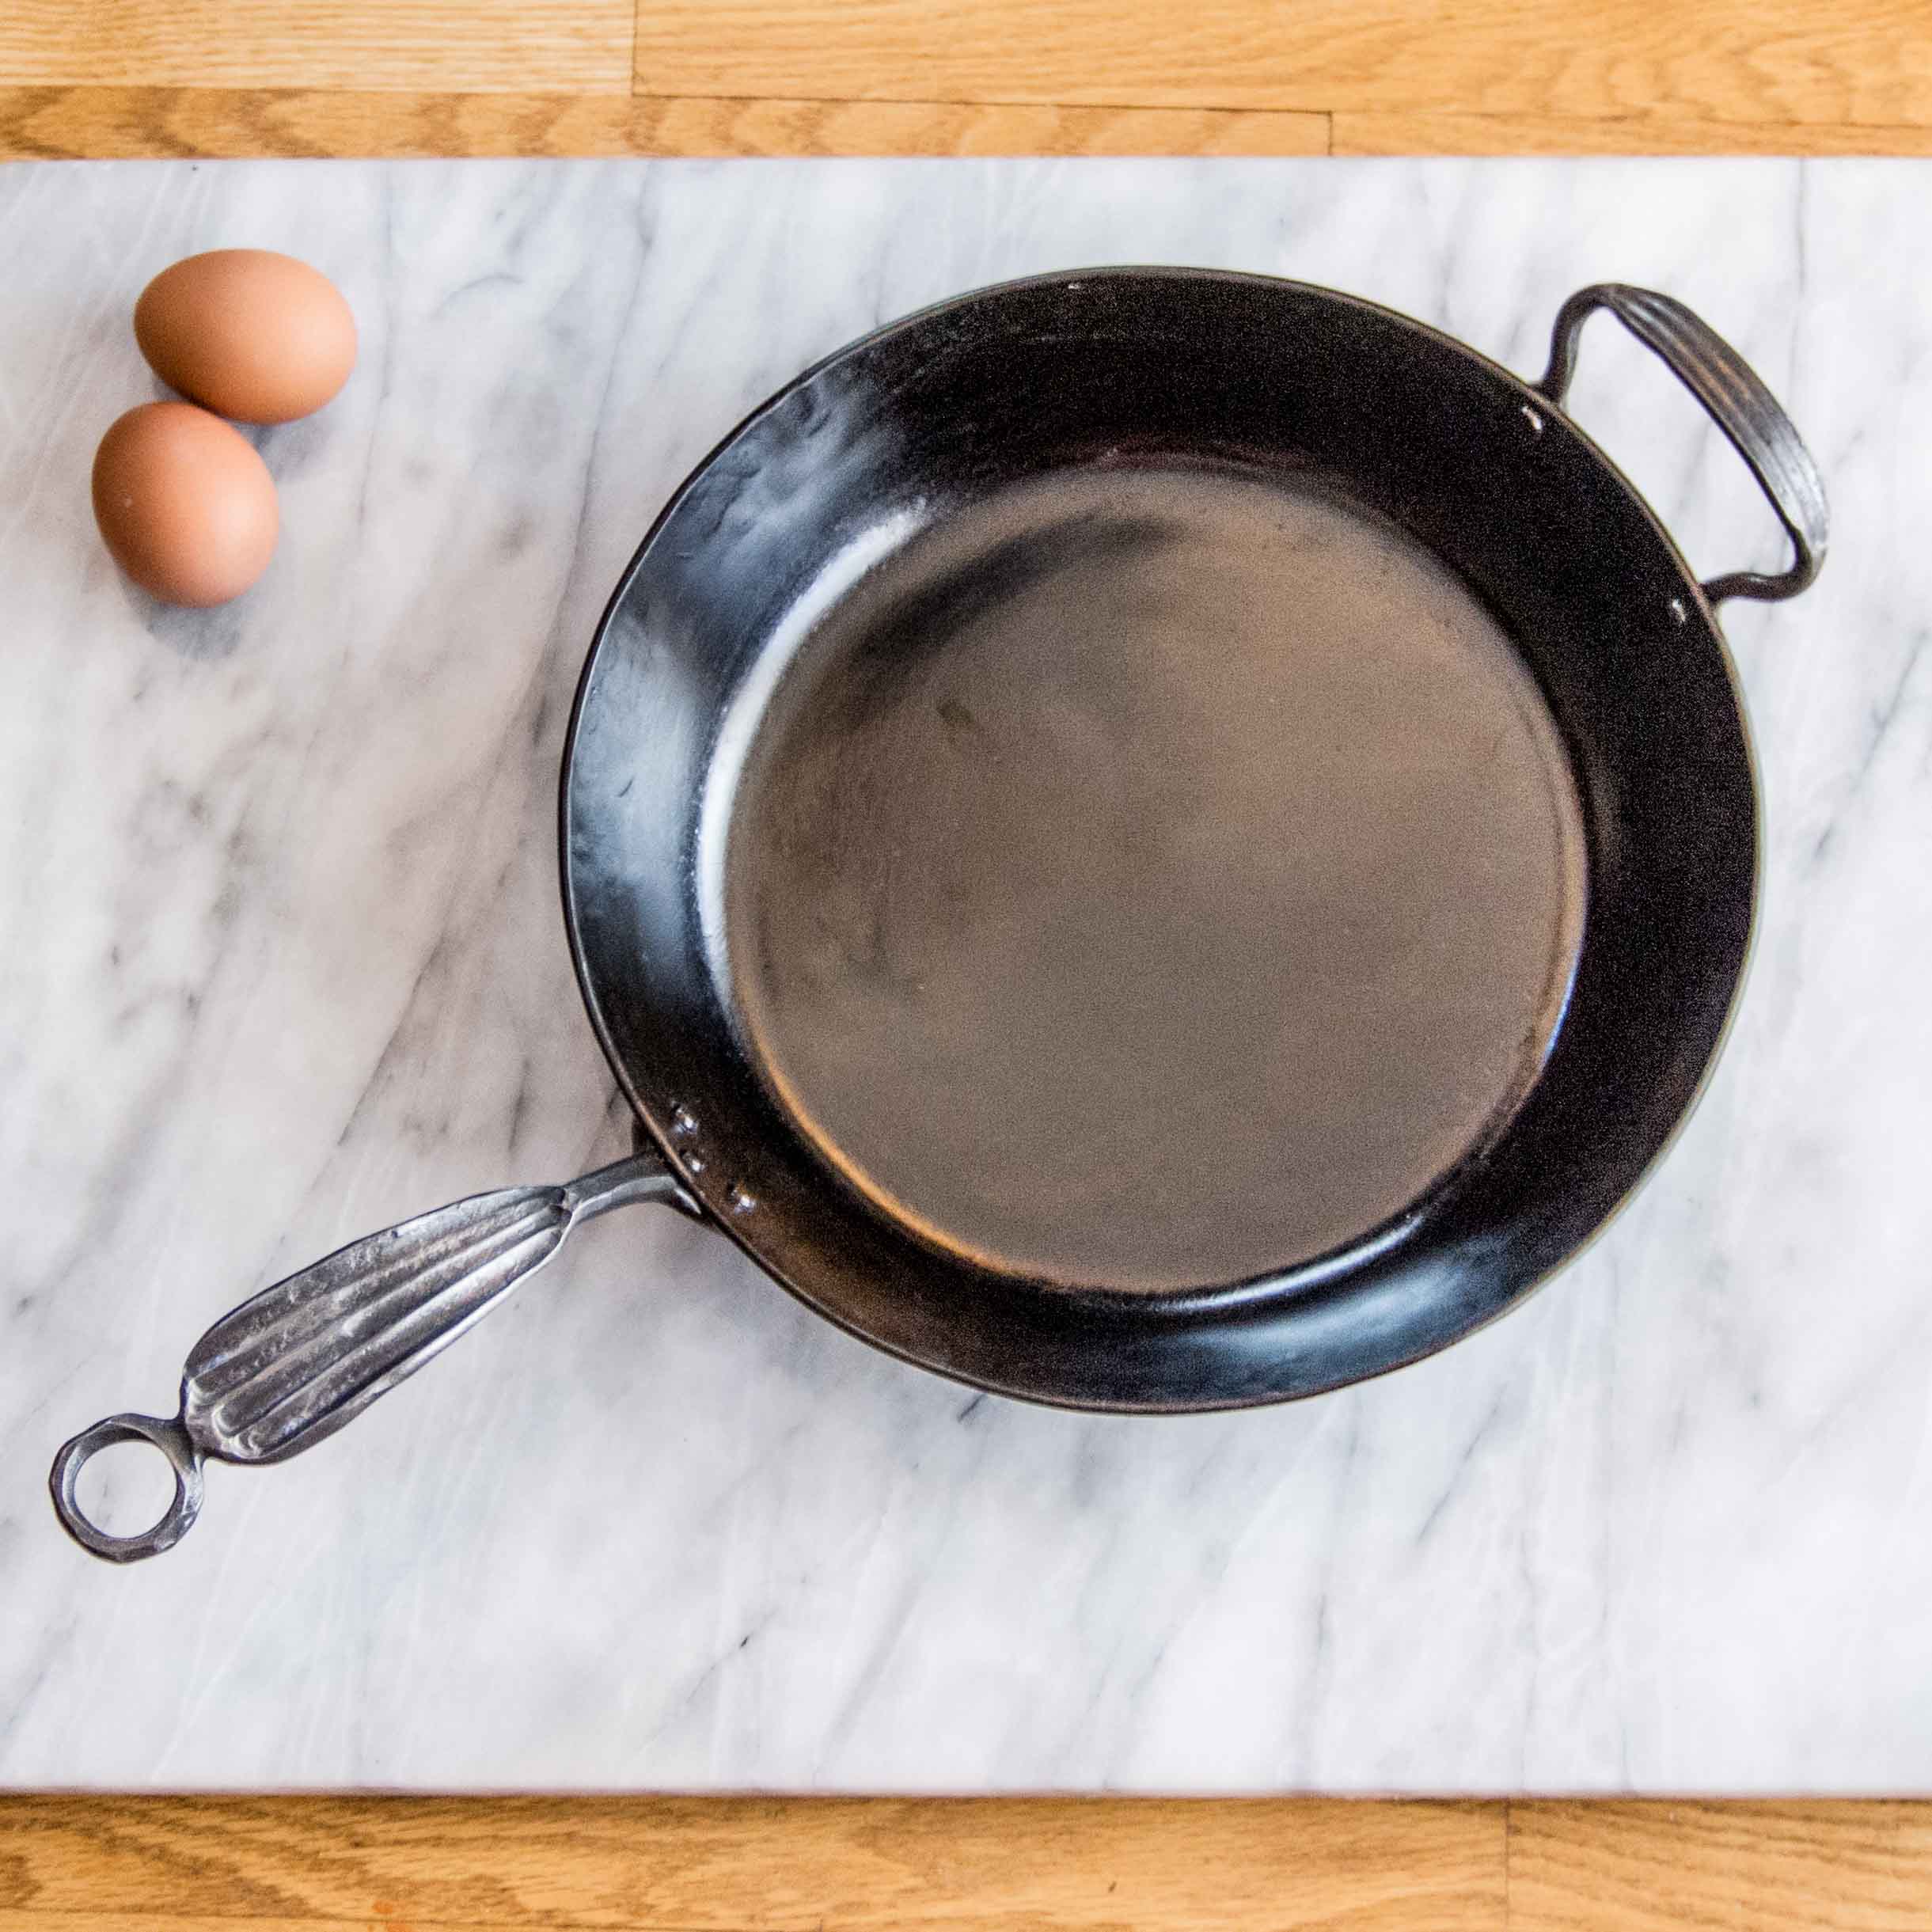 11 Carbon Steel Sauté Pan. Hand forged by Newquist Forge